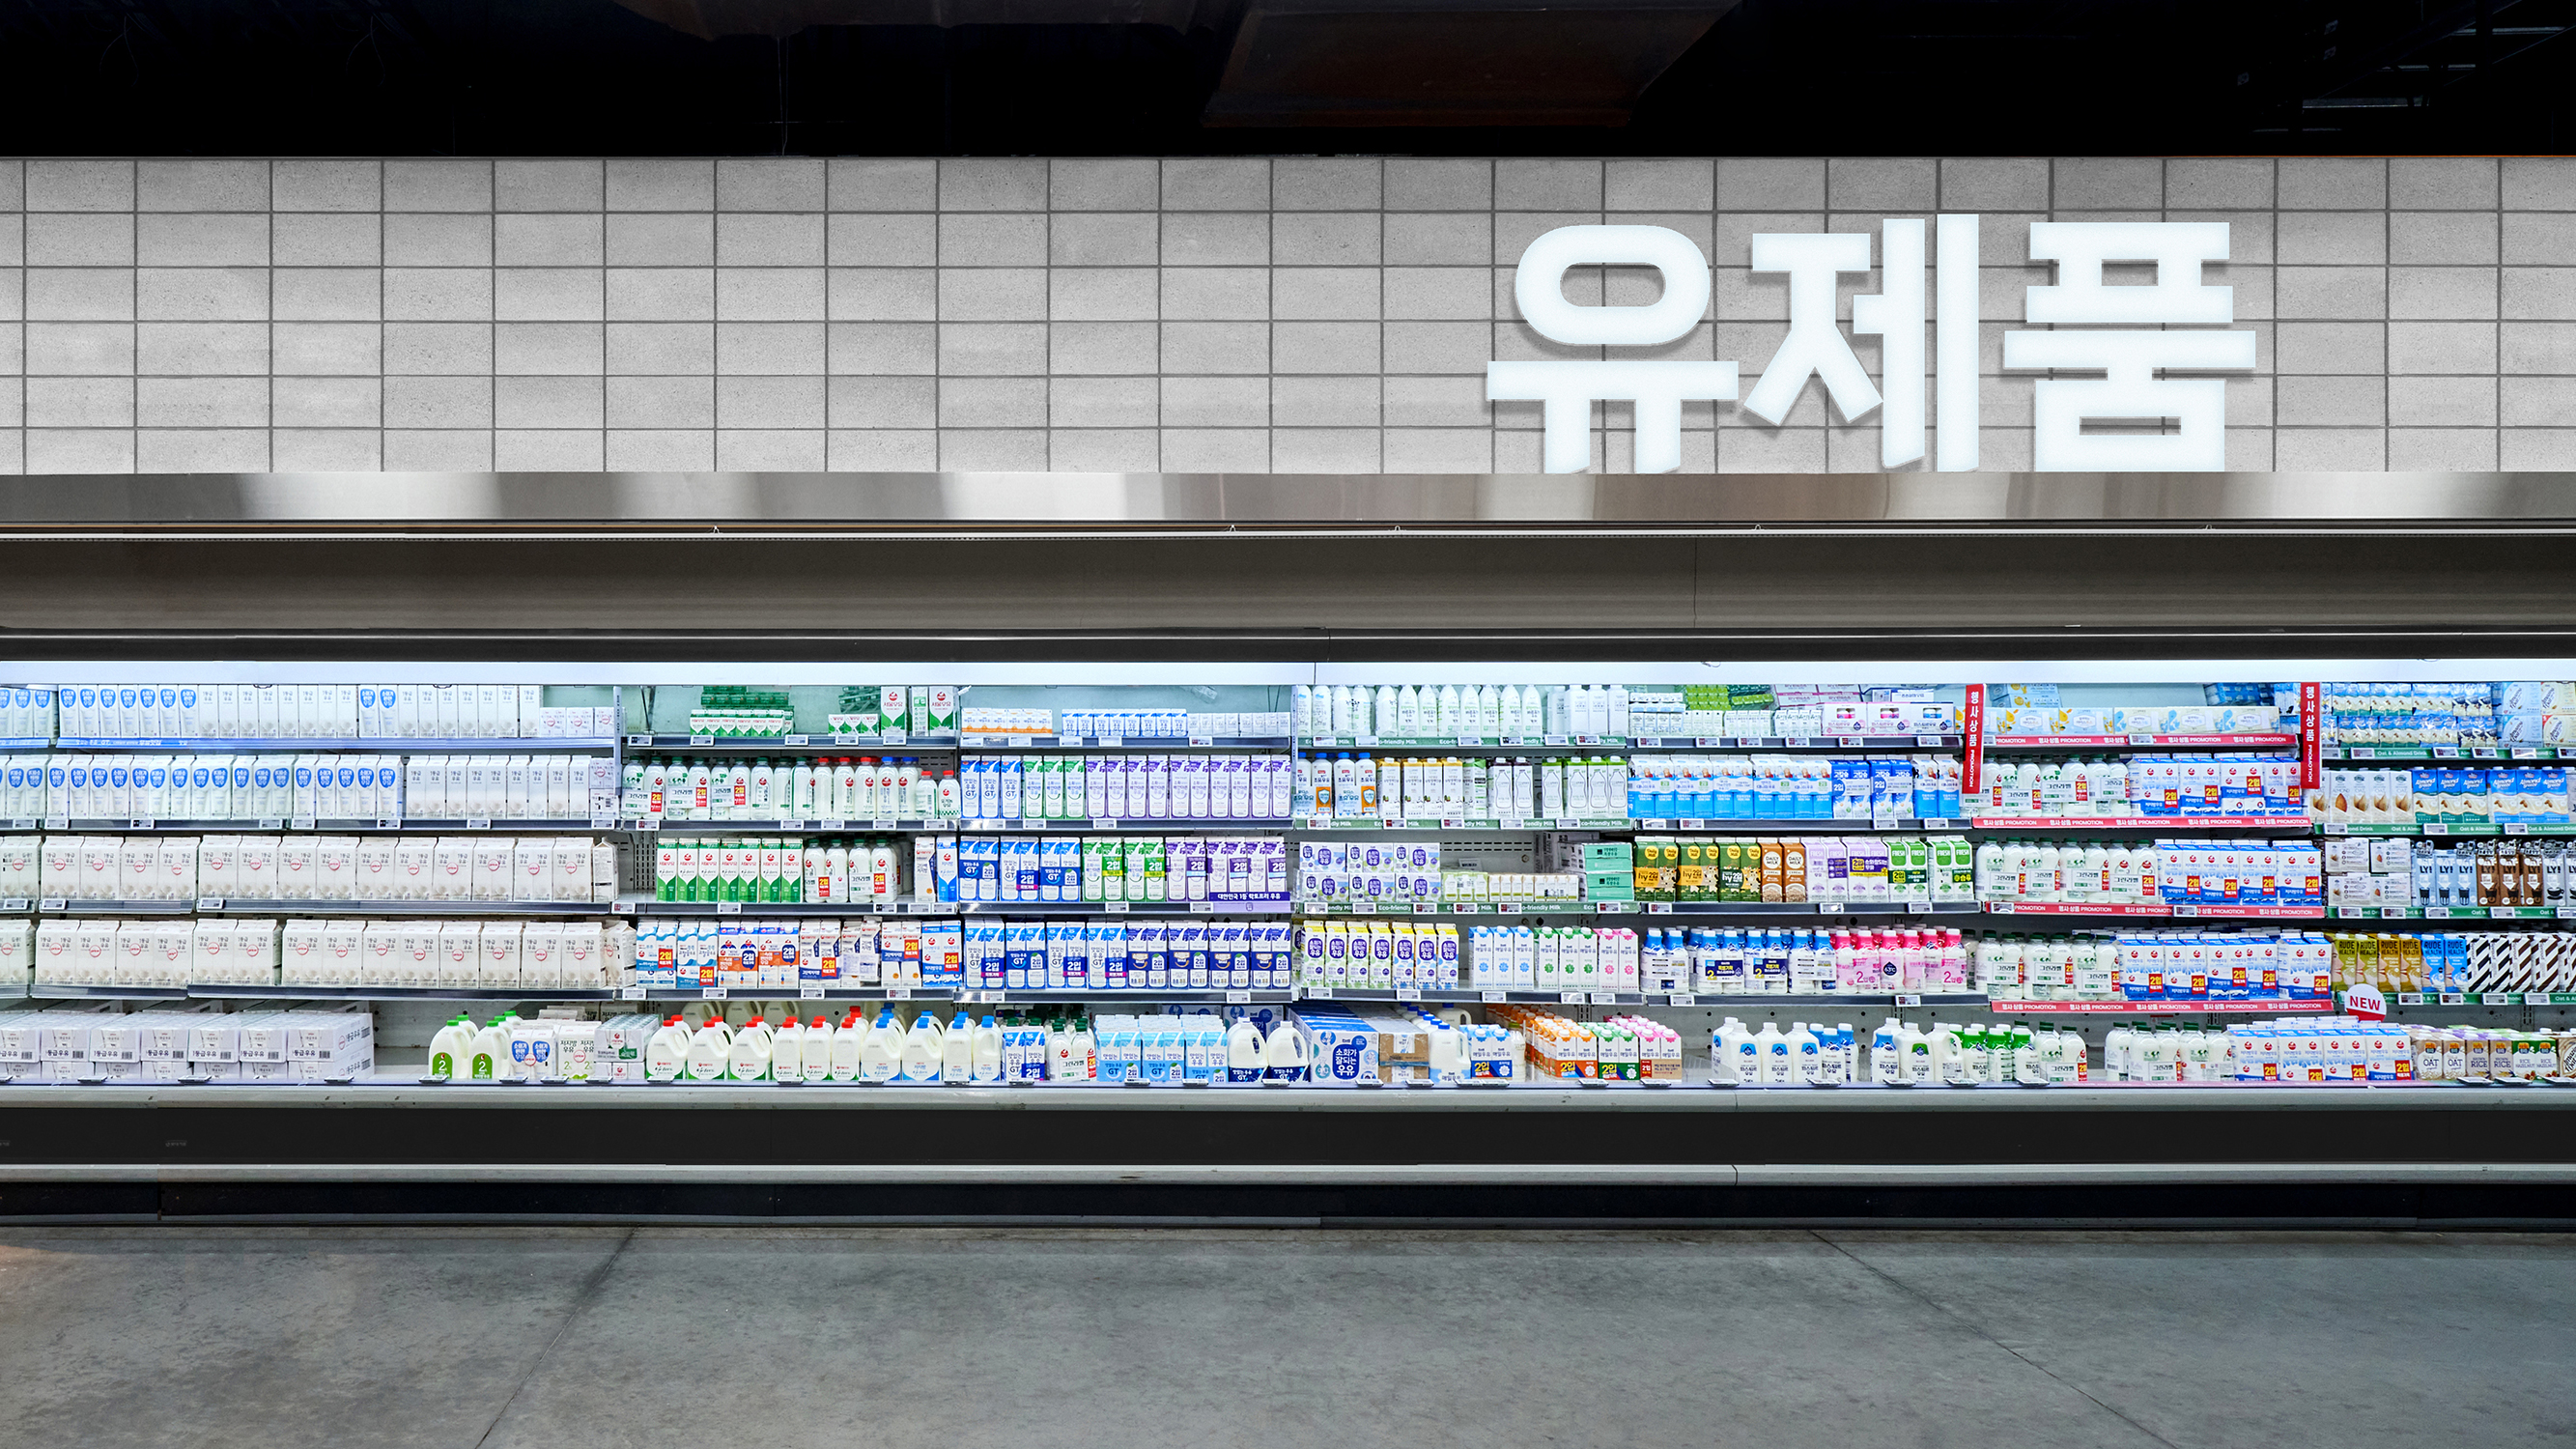 The Jamsil Gothic for Lottemart’s new leap forward